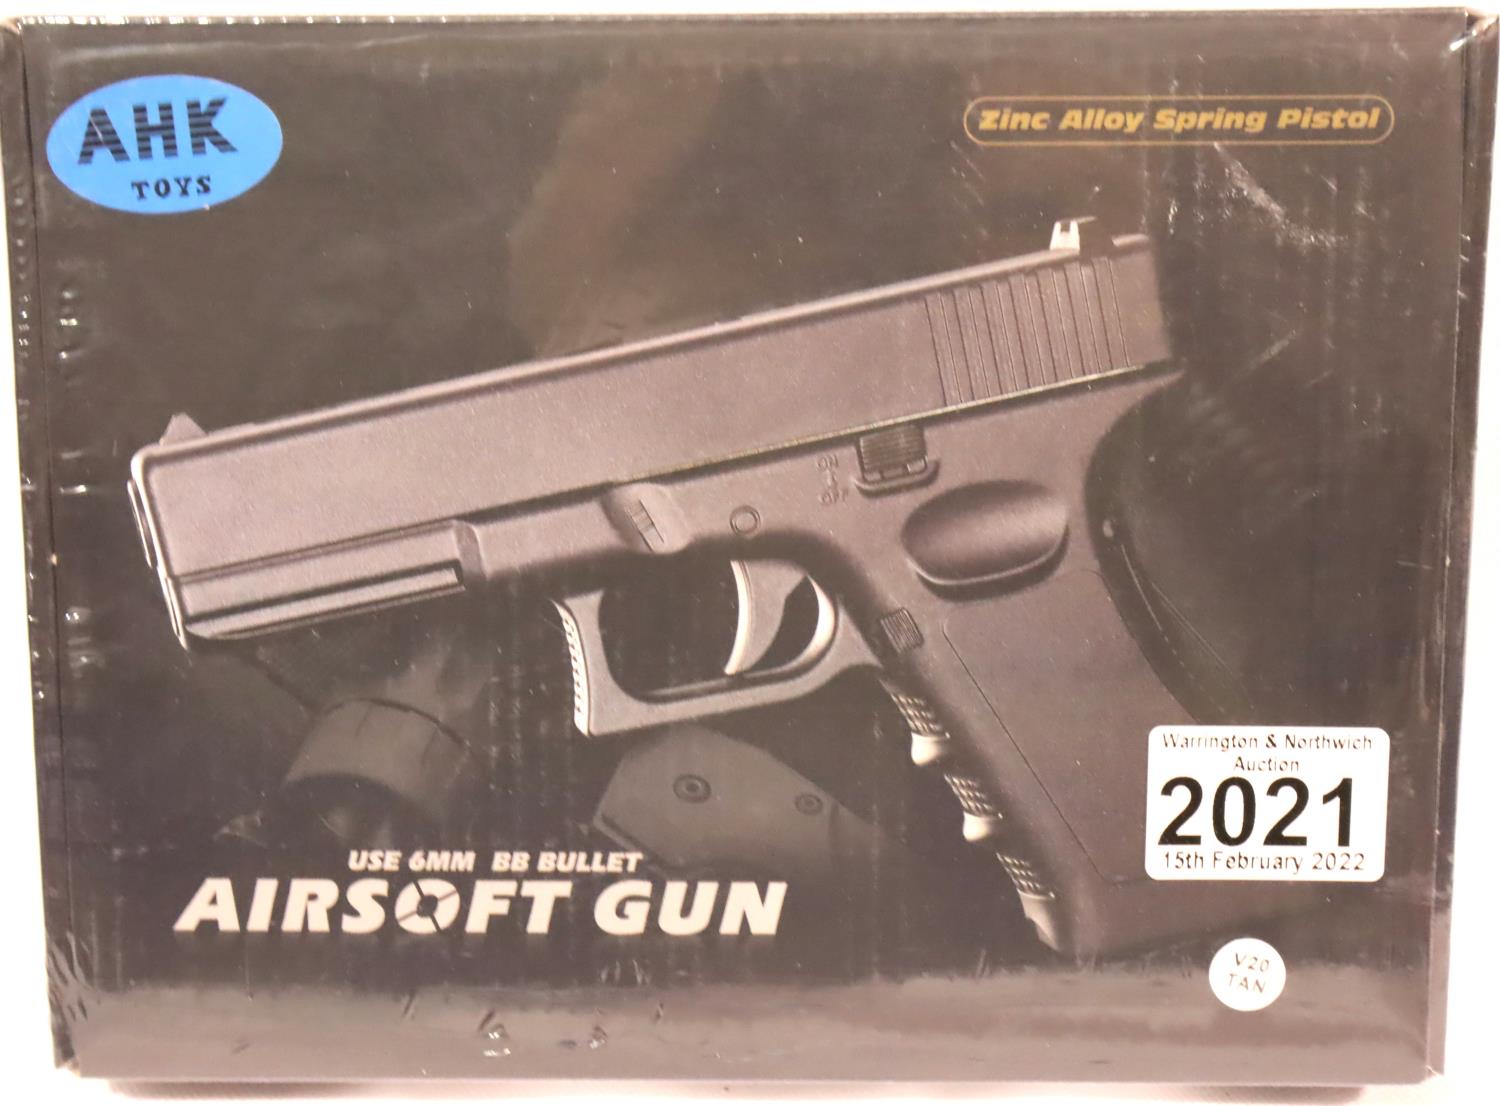 New old stock unopened airsoft pistol. P&P Group 2 (£18+VAT for the first lot and £3+VAT for